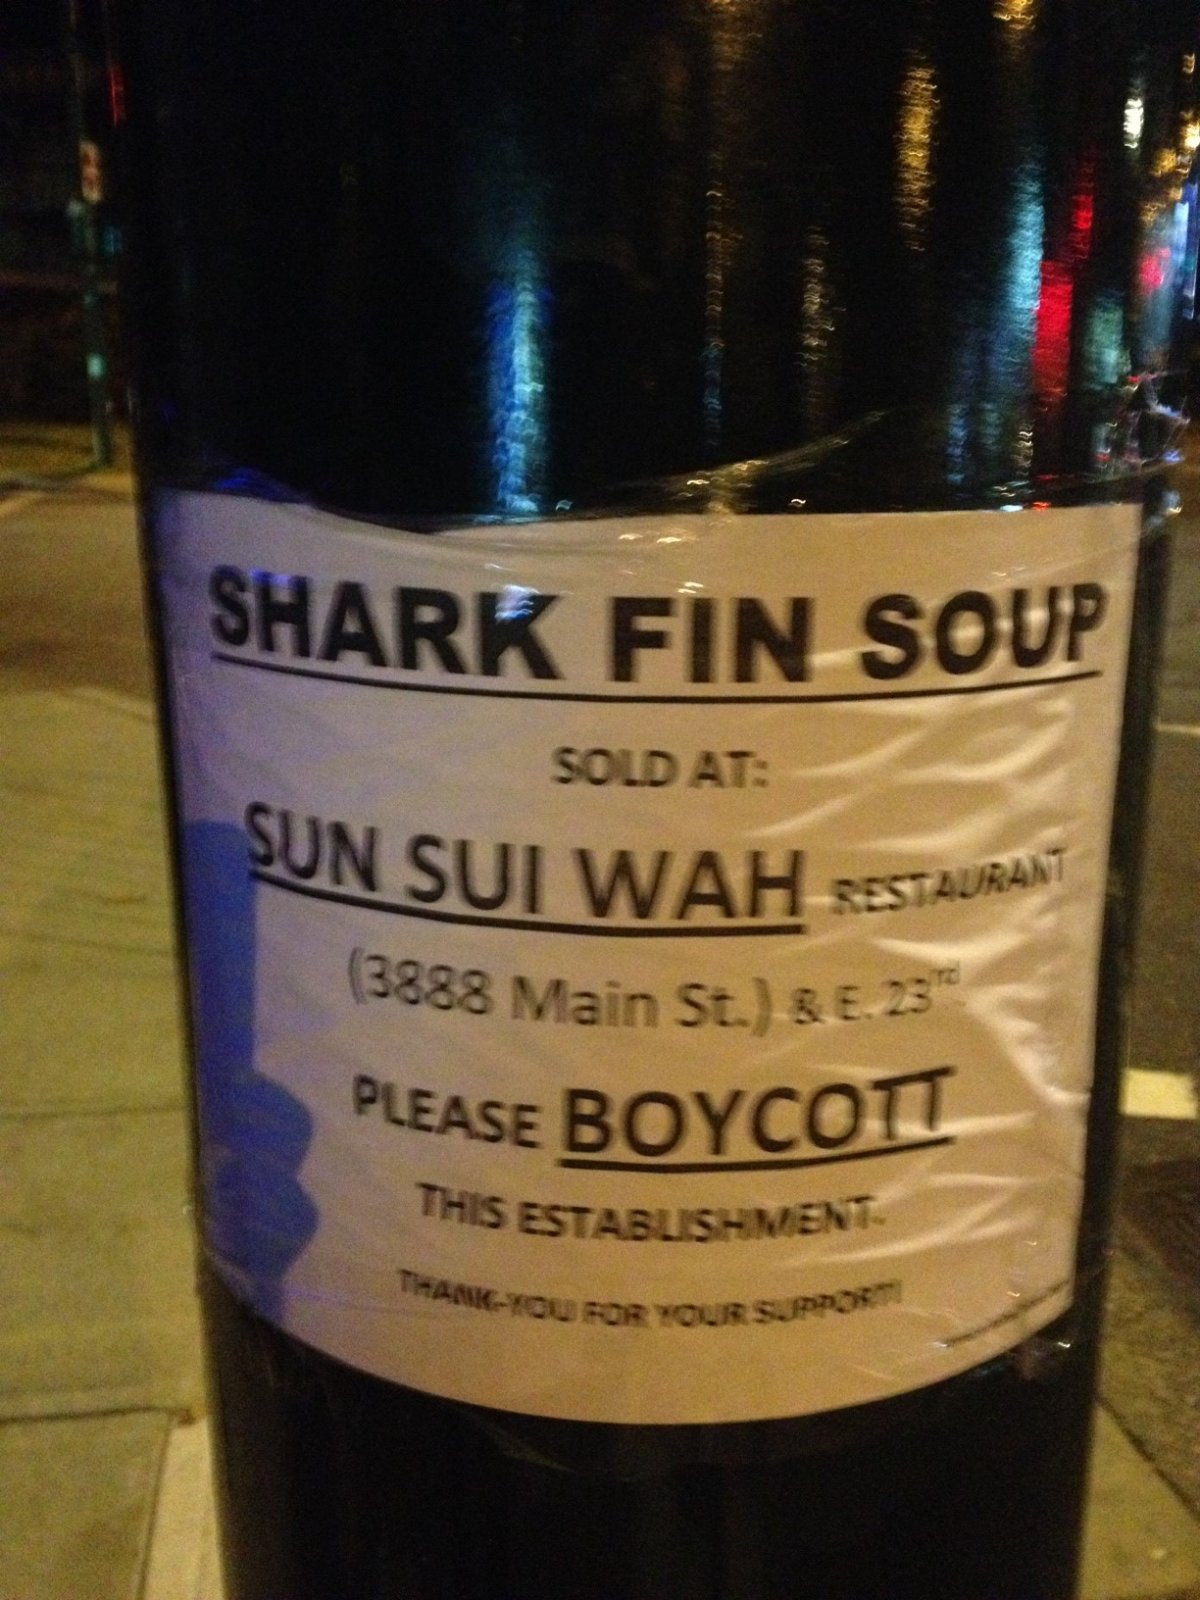 Protesters spread posters calling for boycott of well-known Chinese restaurant serving shark fin soup - image